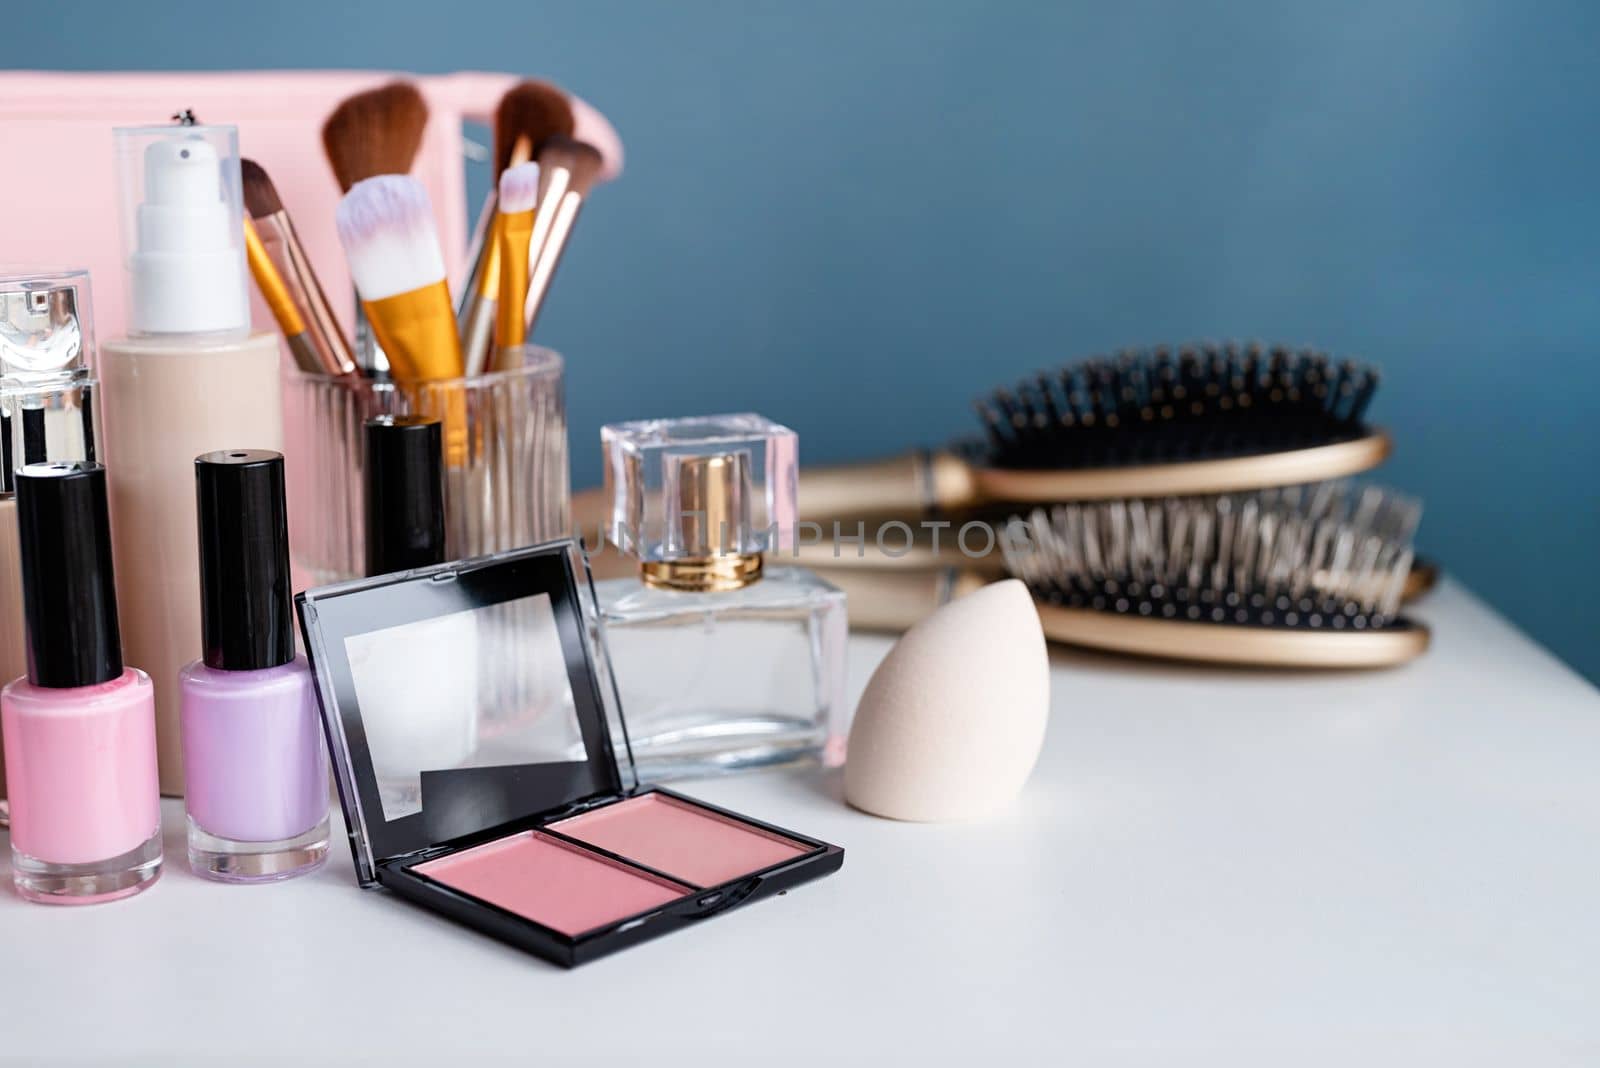 closeup of feminine cosmetic products standing on vanity table, nail polish and face powder